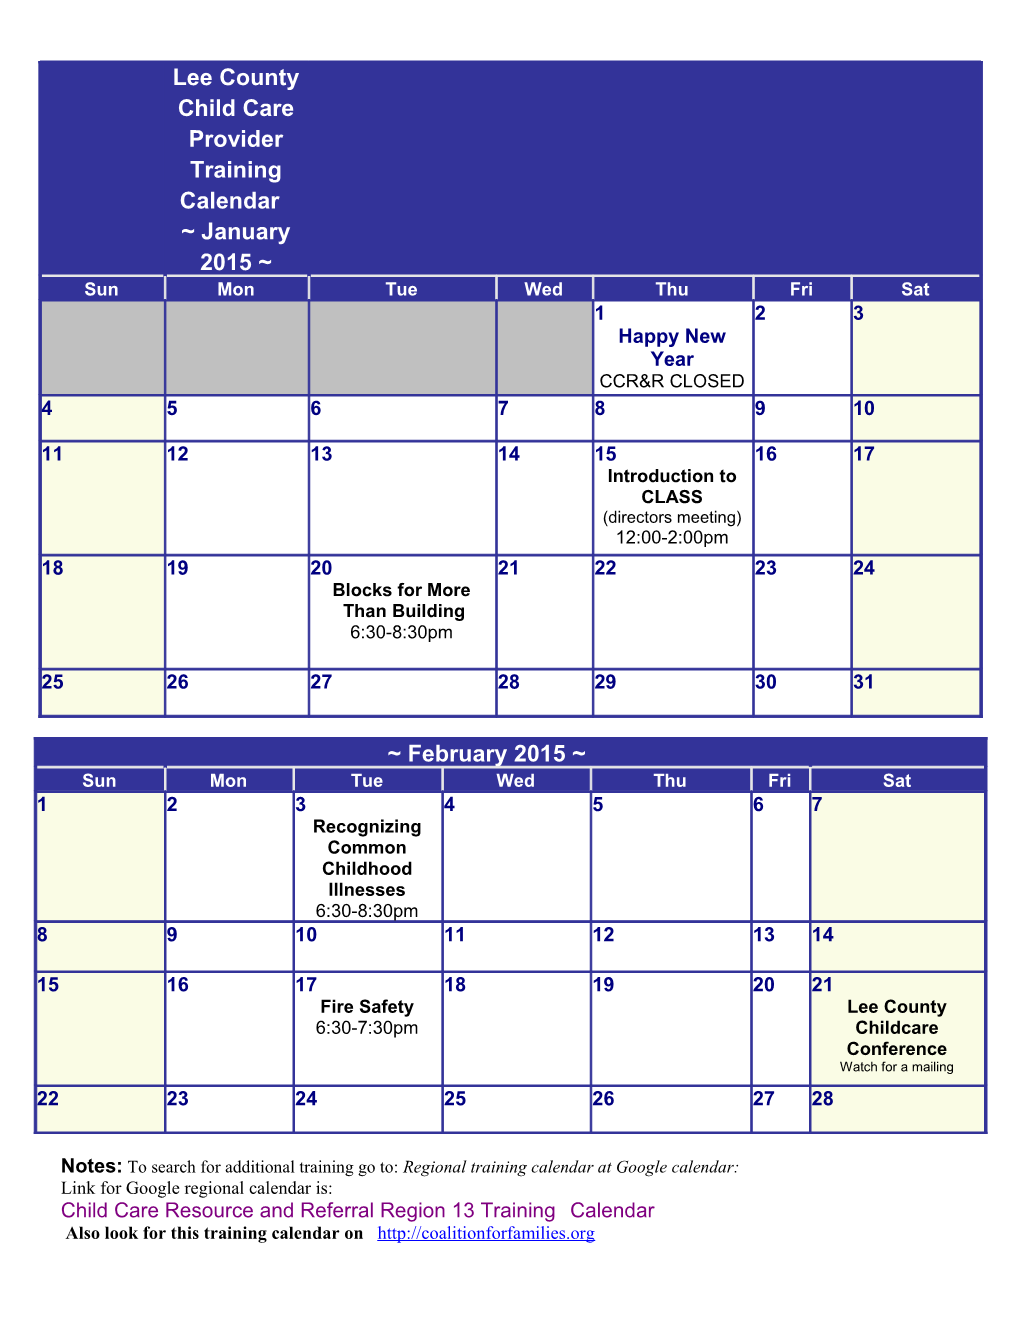 Notes: to Search for Additional Training Go To: Regional Training Calendar at Google Calendar